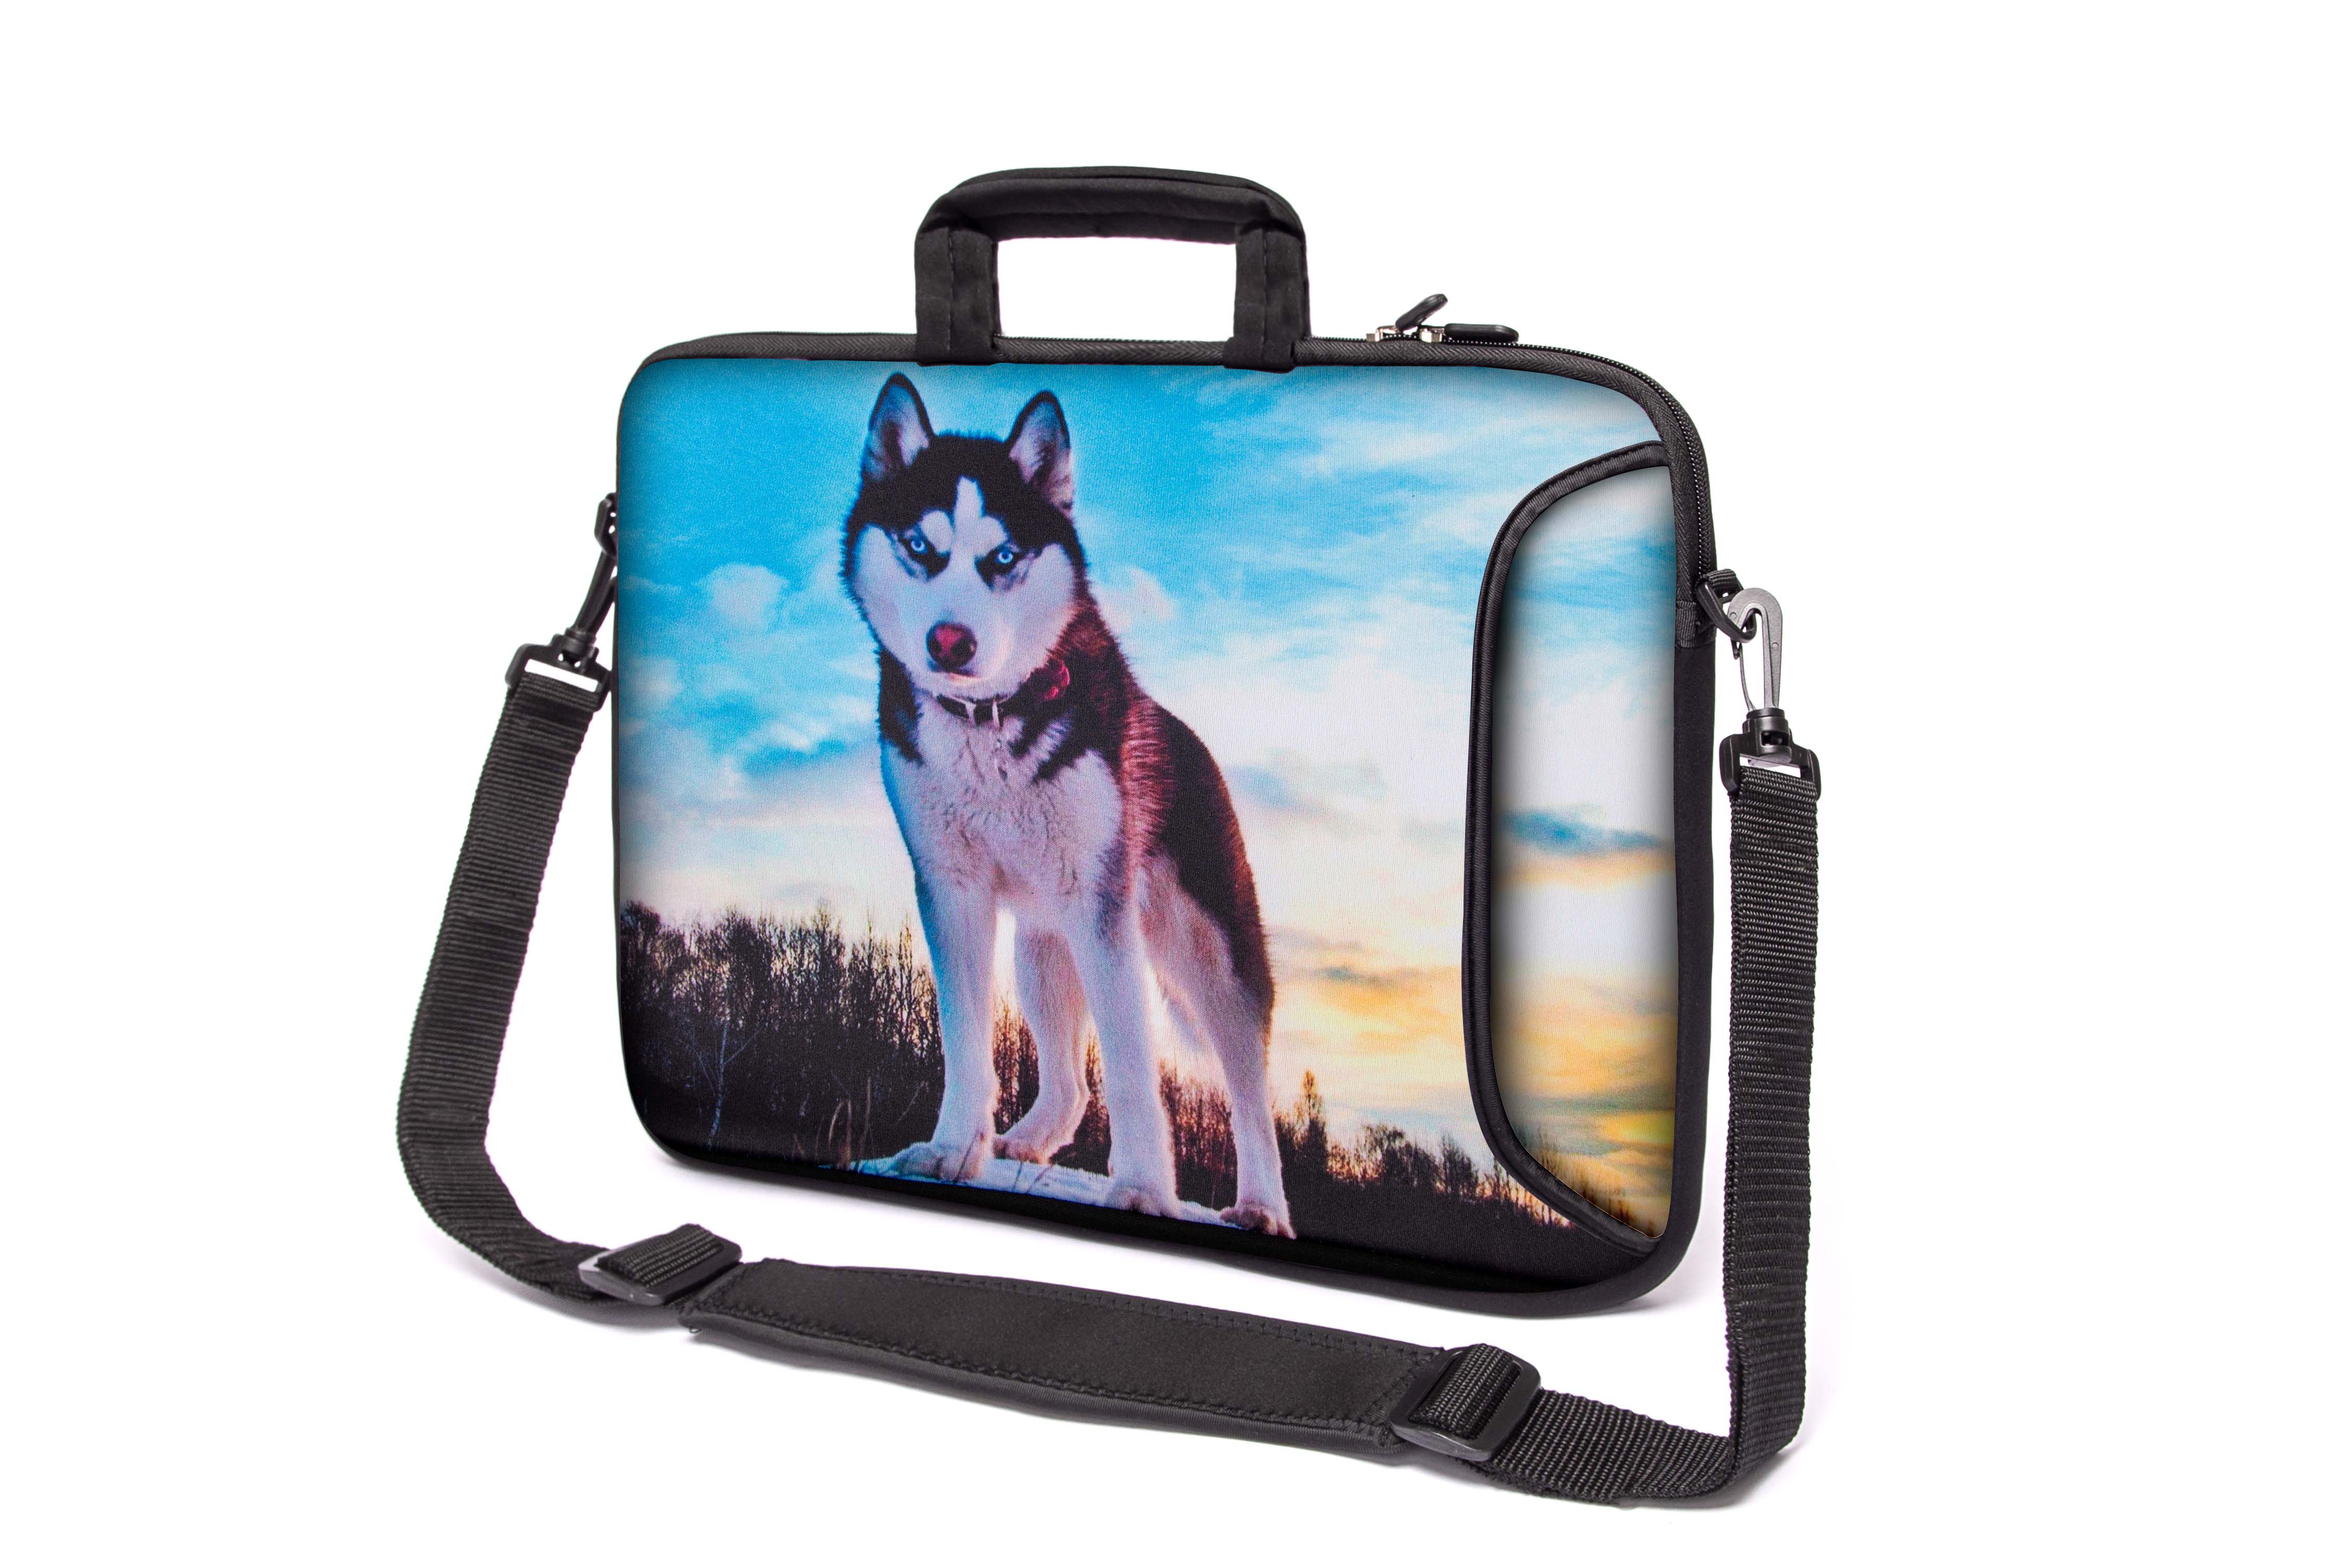 15"- 15.6" (inch) LAPTOP BAG CARRY CASE/BAG WITH HANDLE & STRAP NEOPRENE FOR LAPTOPS/NOTEBOOKS, *Husky*